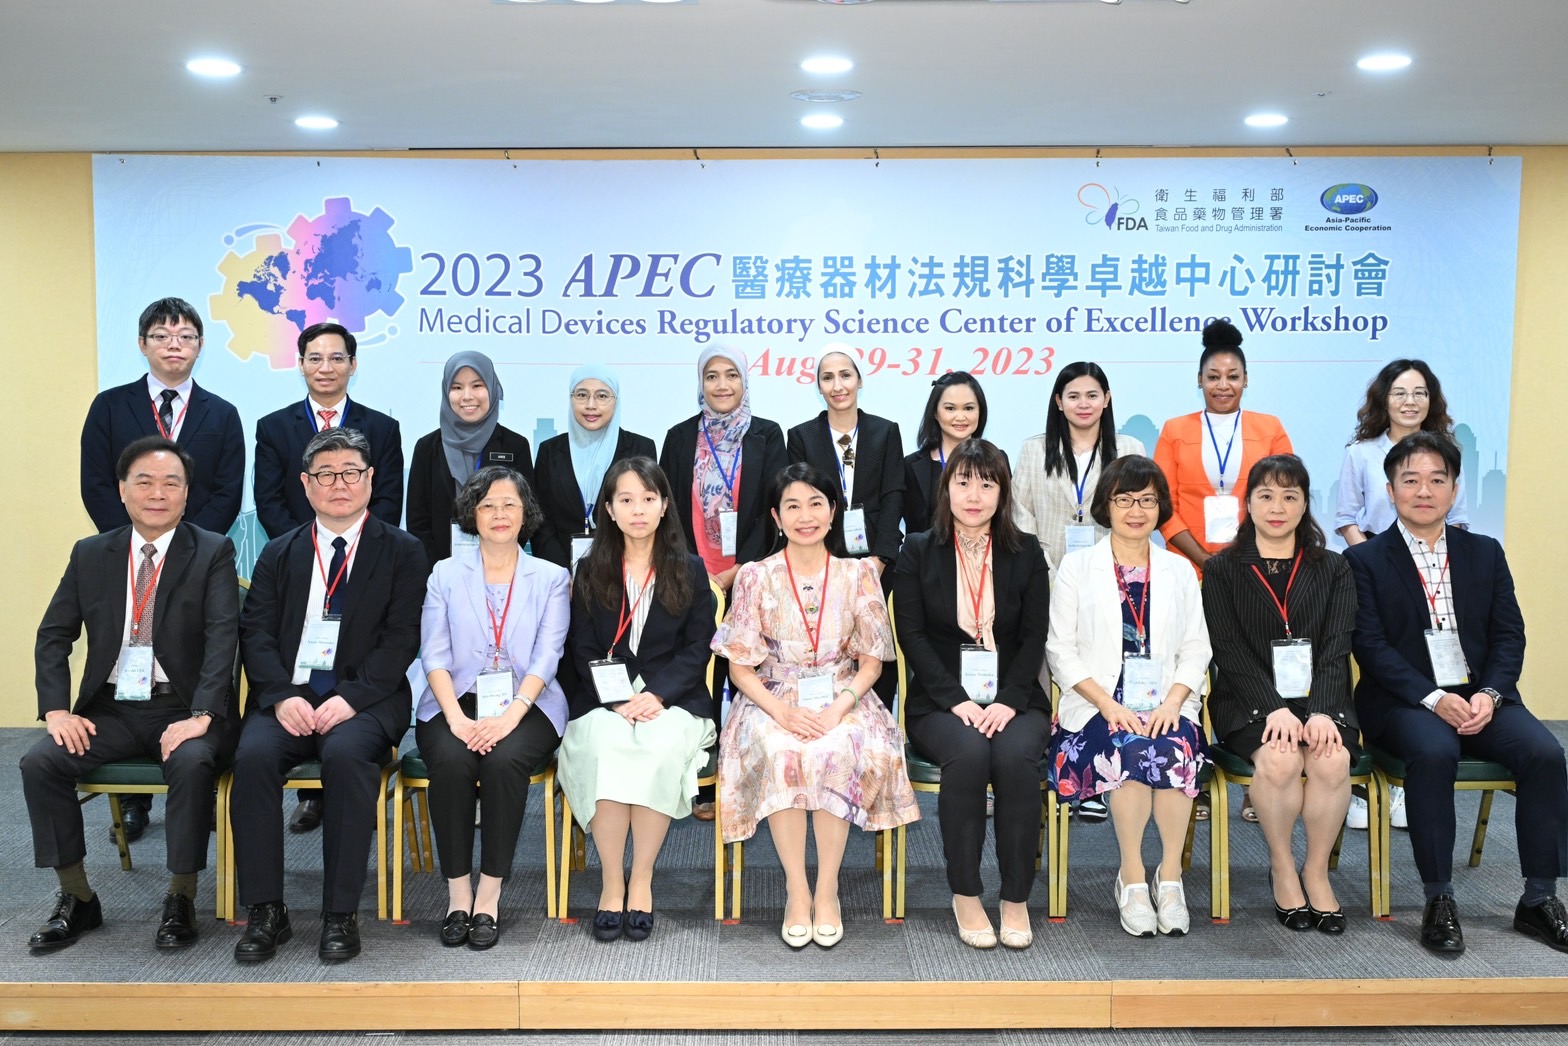 2023.8.29-8.31 APEC Medical Devices Regulatory Science Center of Excellence Workshop photos